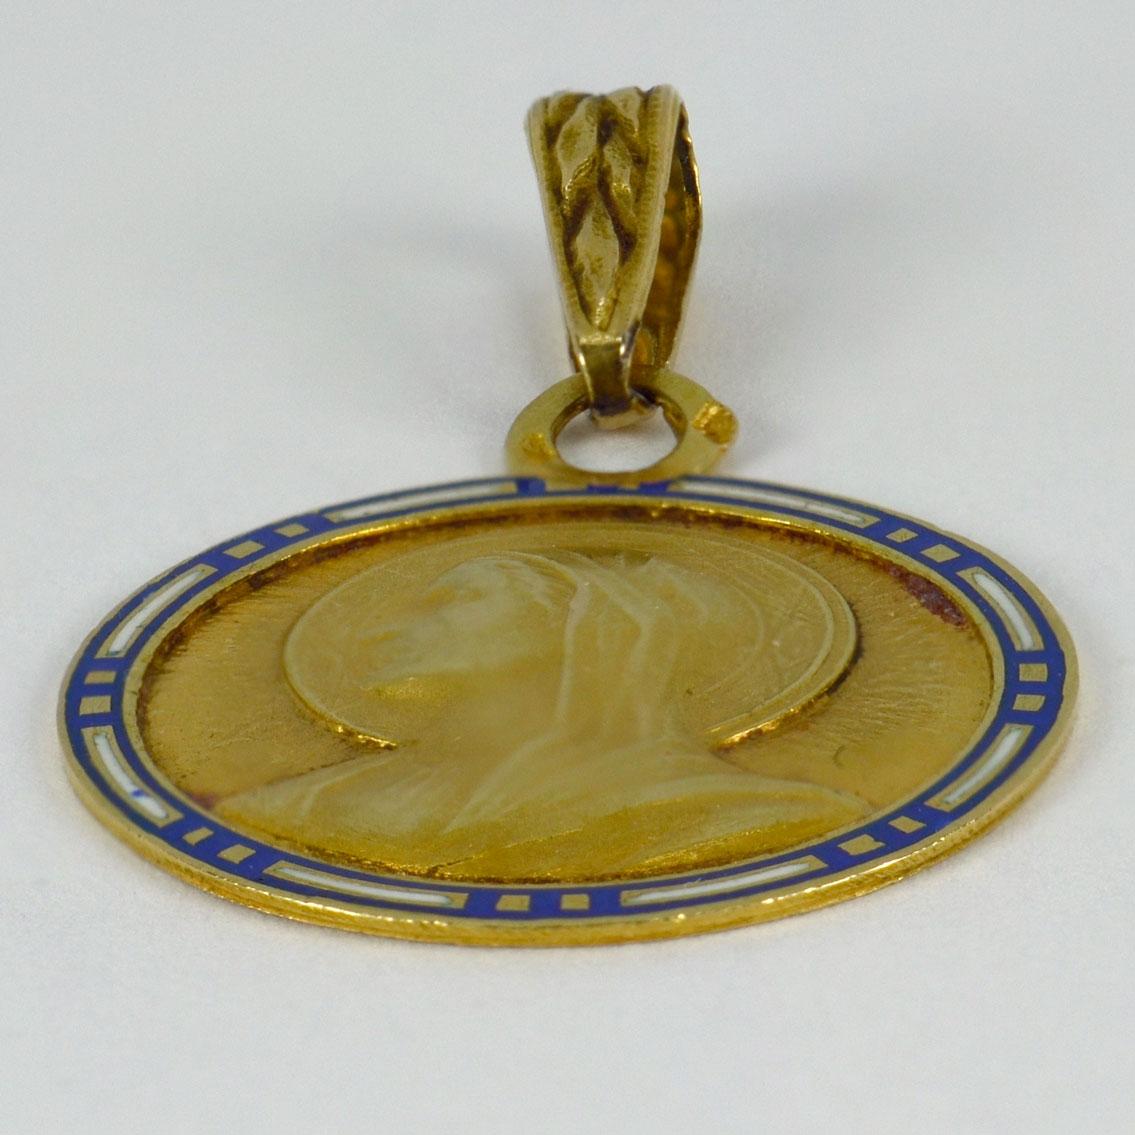 A French 18 karat (18K) yellow gold charm pendant designed as a medal depicting the Virgin Mary with a blue and white cloisonne enamel frame, with a monogram for SP and the date ‘19 Juin 1930’ to the reverse. Stamped with the eagle’s head for French